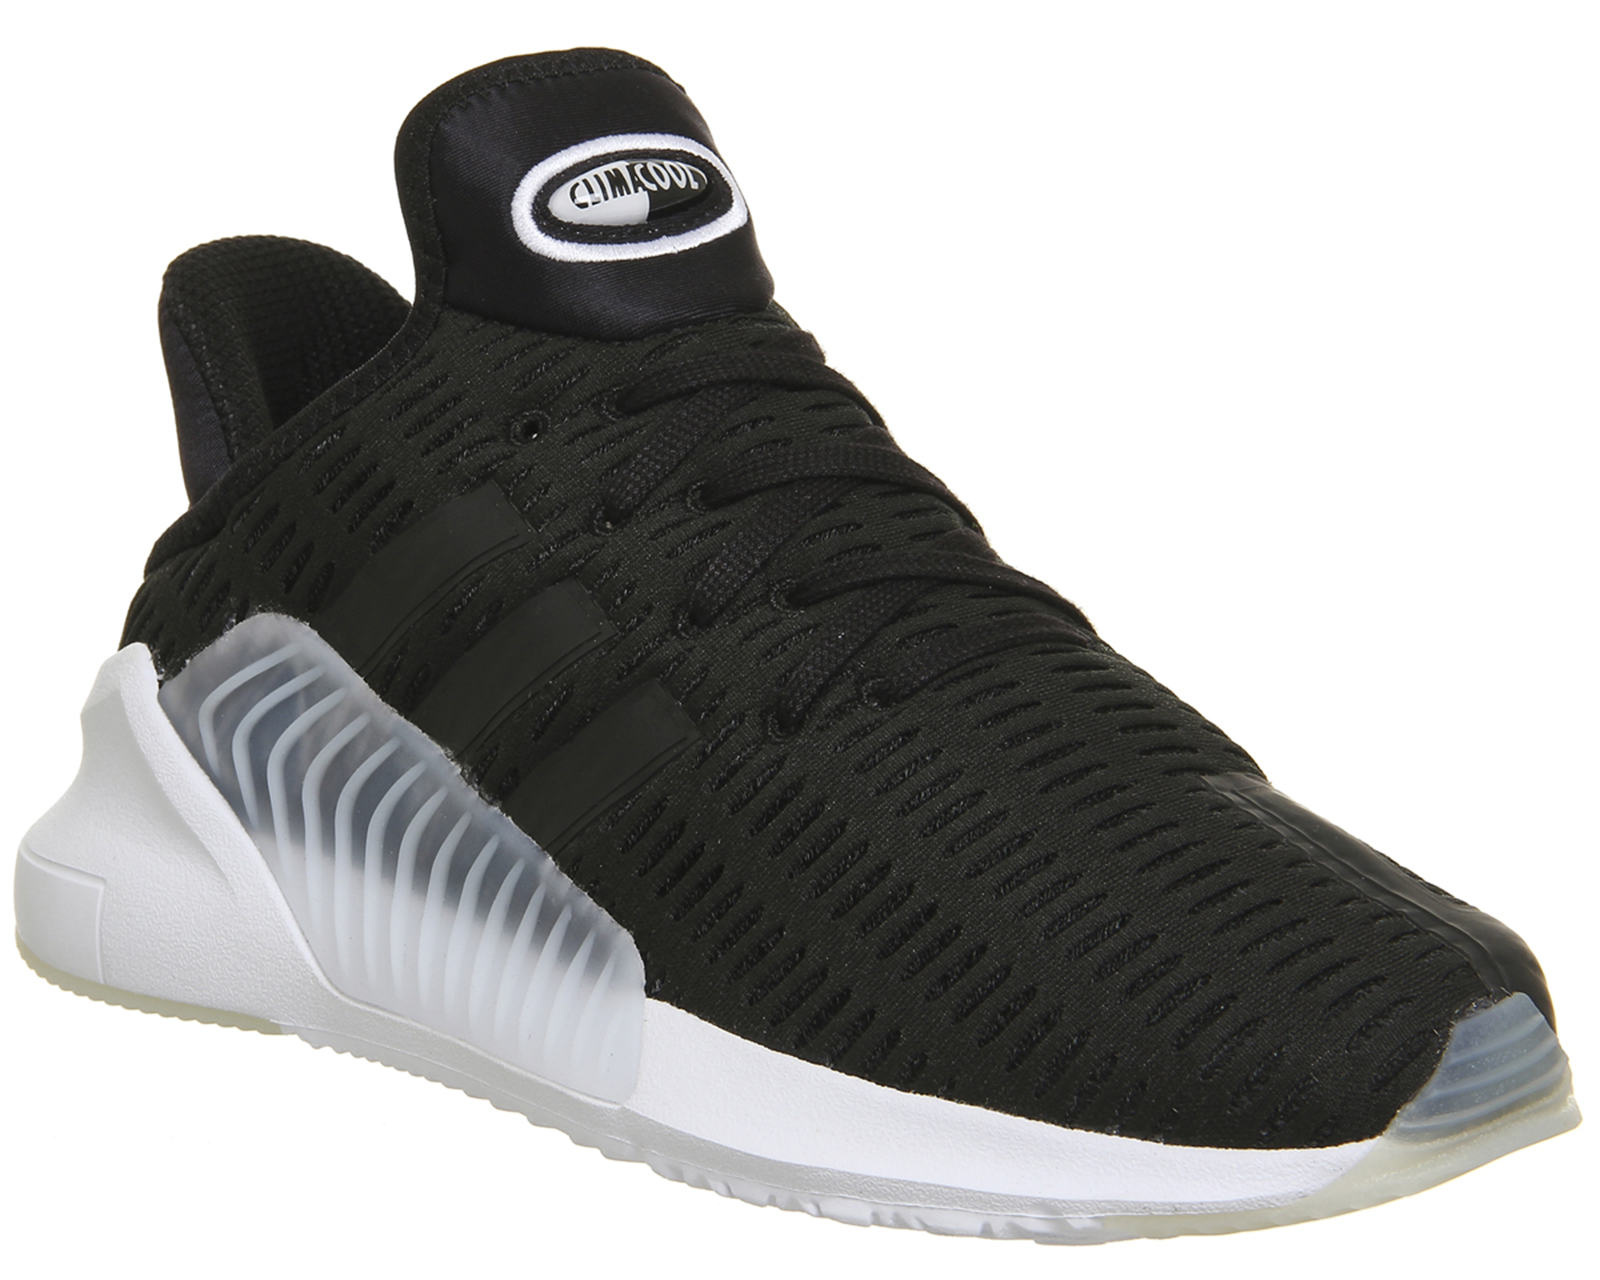 adidas Climacool 02/17 Core Black White - His trainers